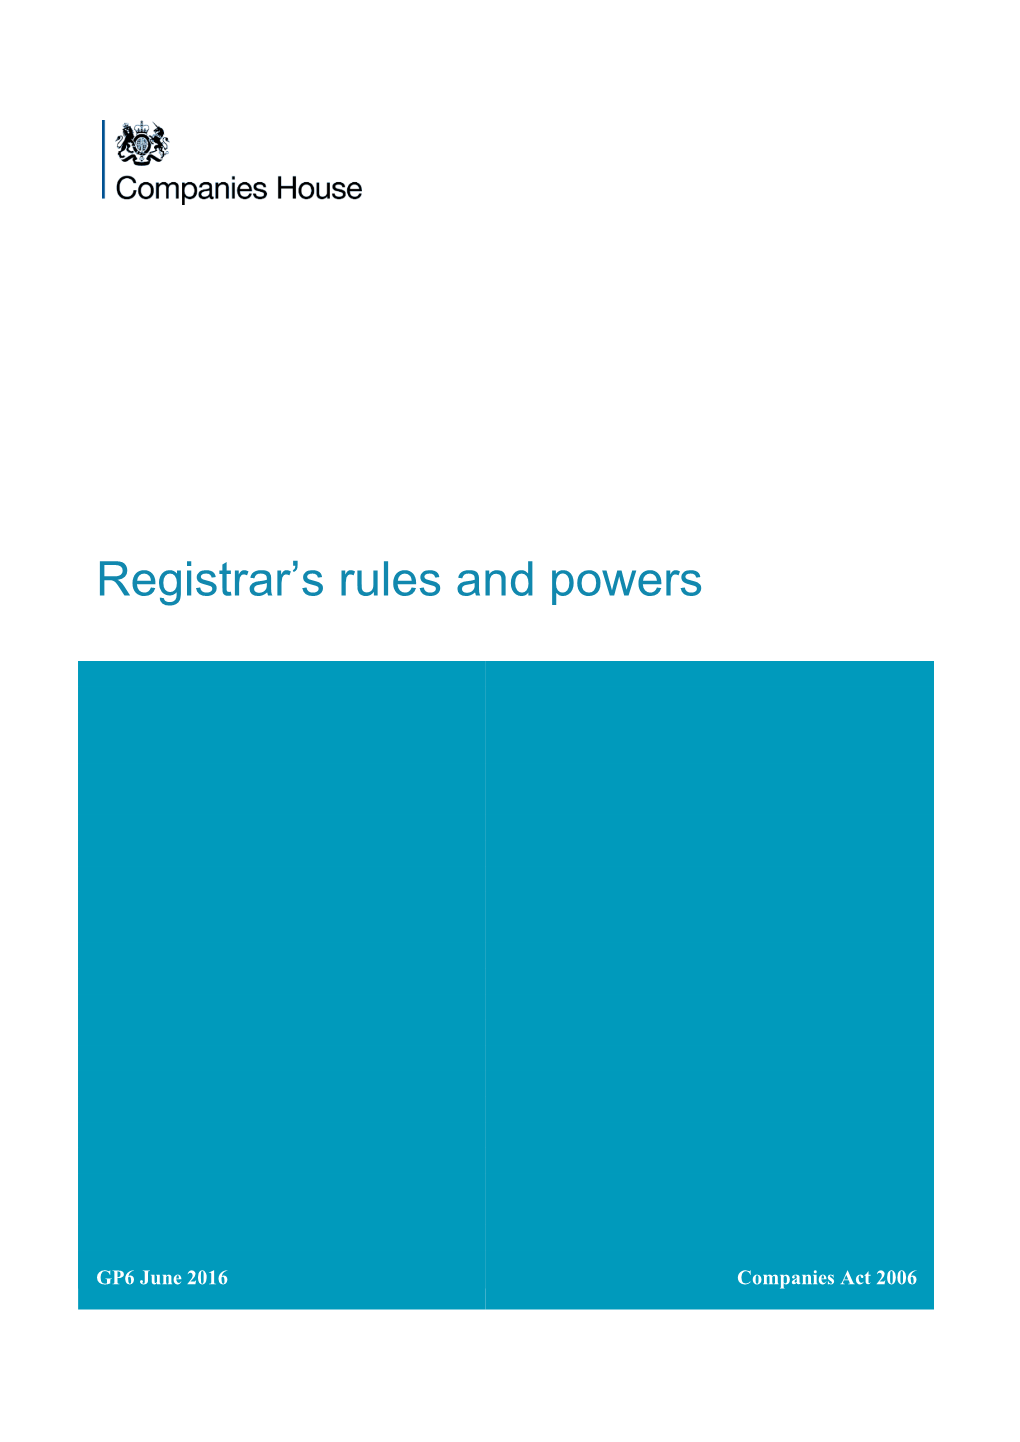 Registrar's Rules and Powers (GP6)